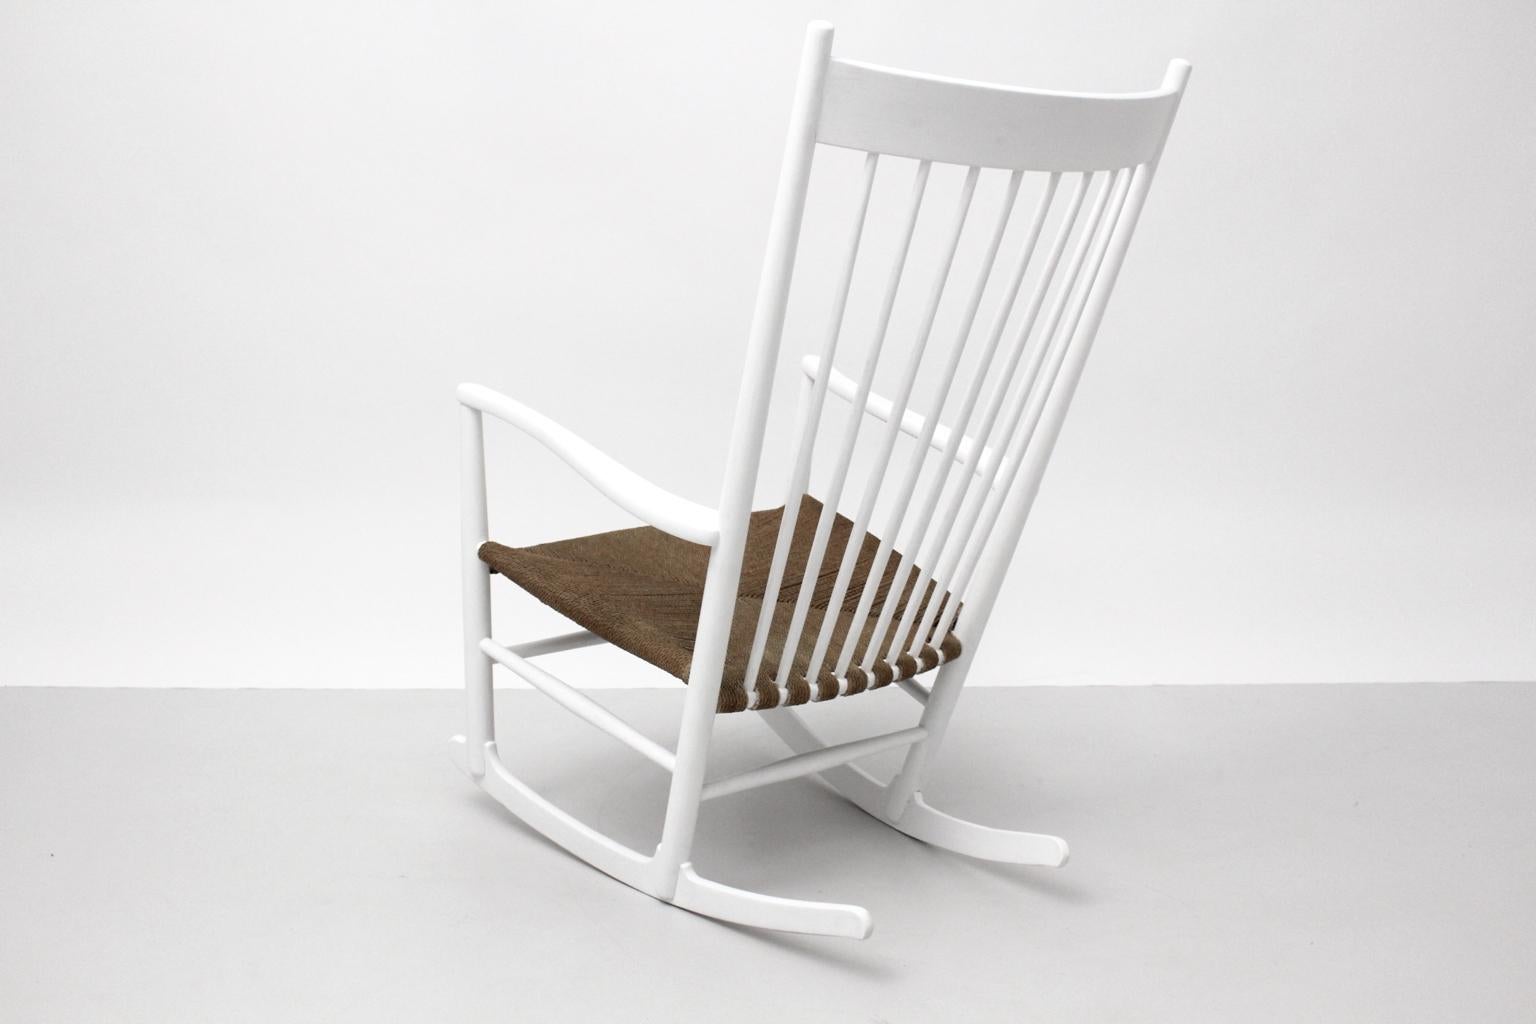 Scandinavian Modern Classic rocking chair J 16 by Hans Wegner designed 1944 and executed by Mobler F.D.B., Denmark, 1964 - marked.
The lacquered surface was refreshed few years ago. The seat shows a string mesh.
The vintage condition is very good